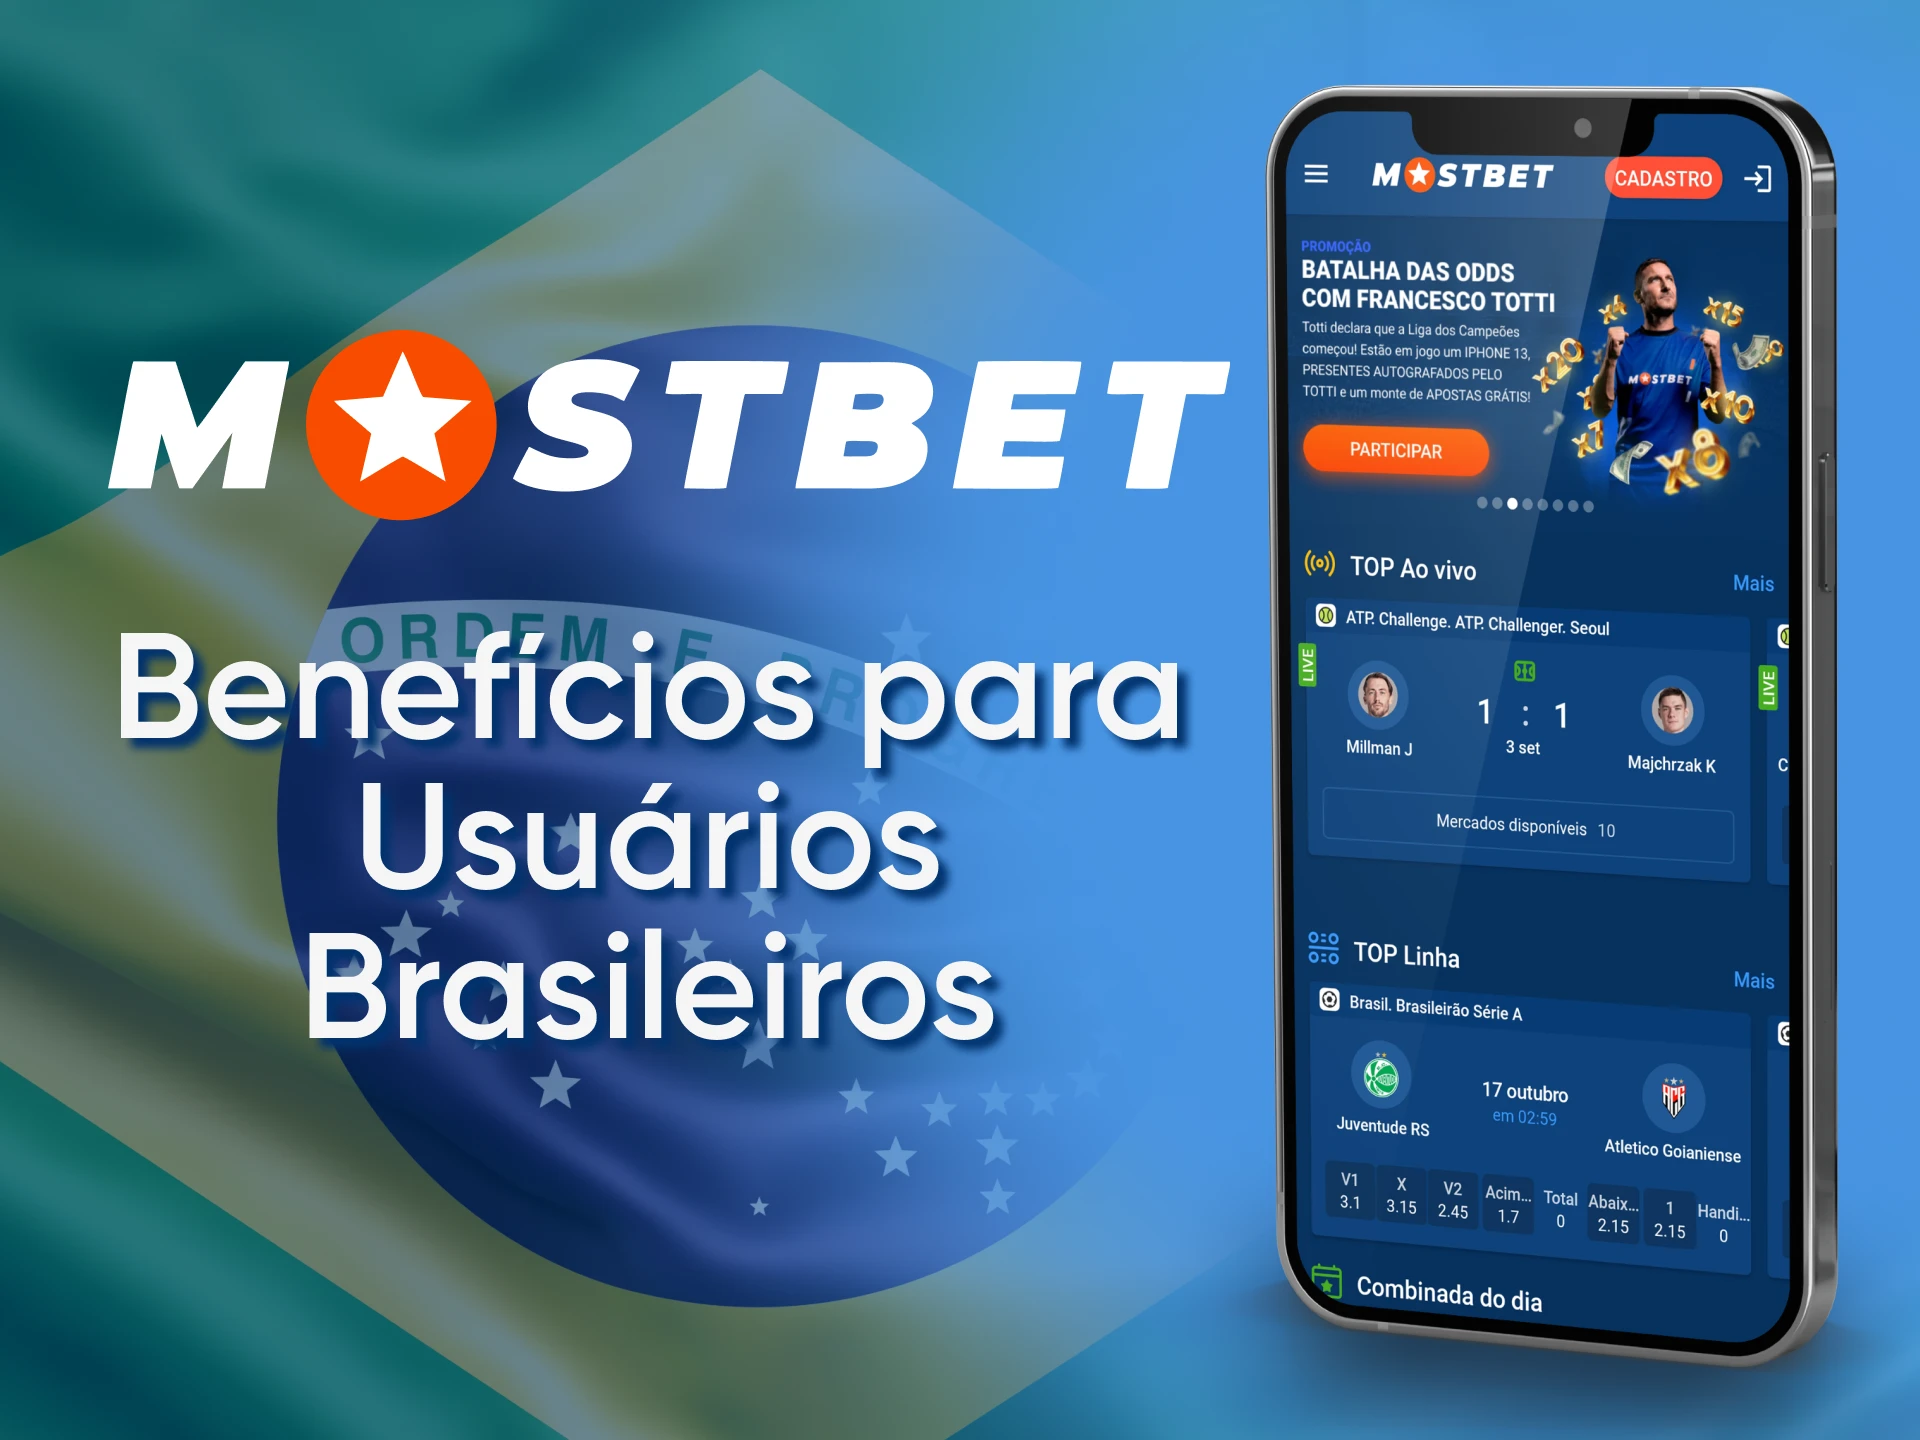 Mostbet has a handy mobile app with lots of useful features for Brazilian users.